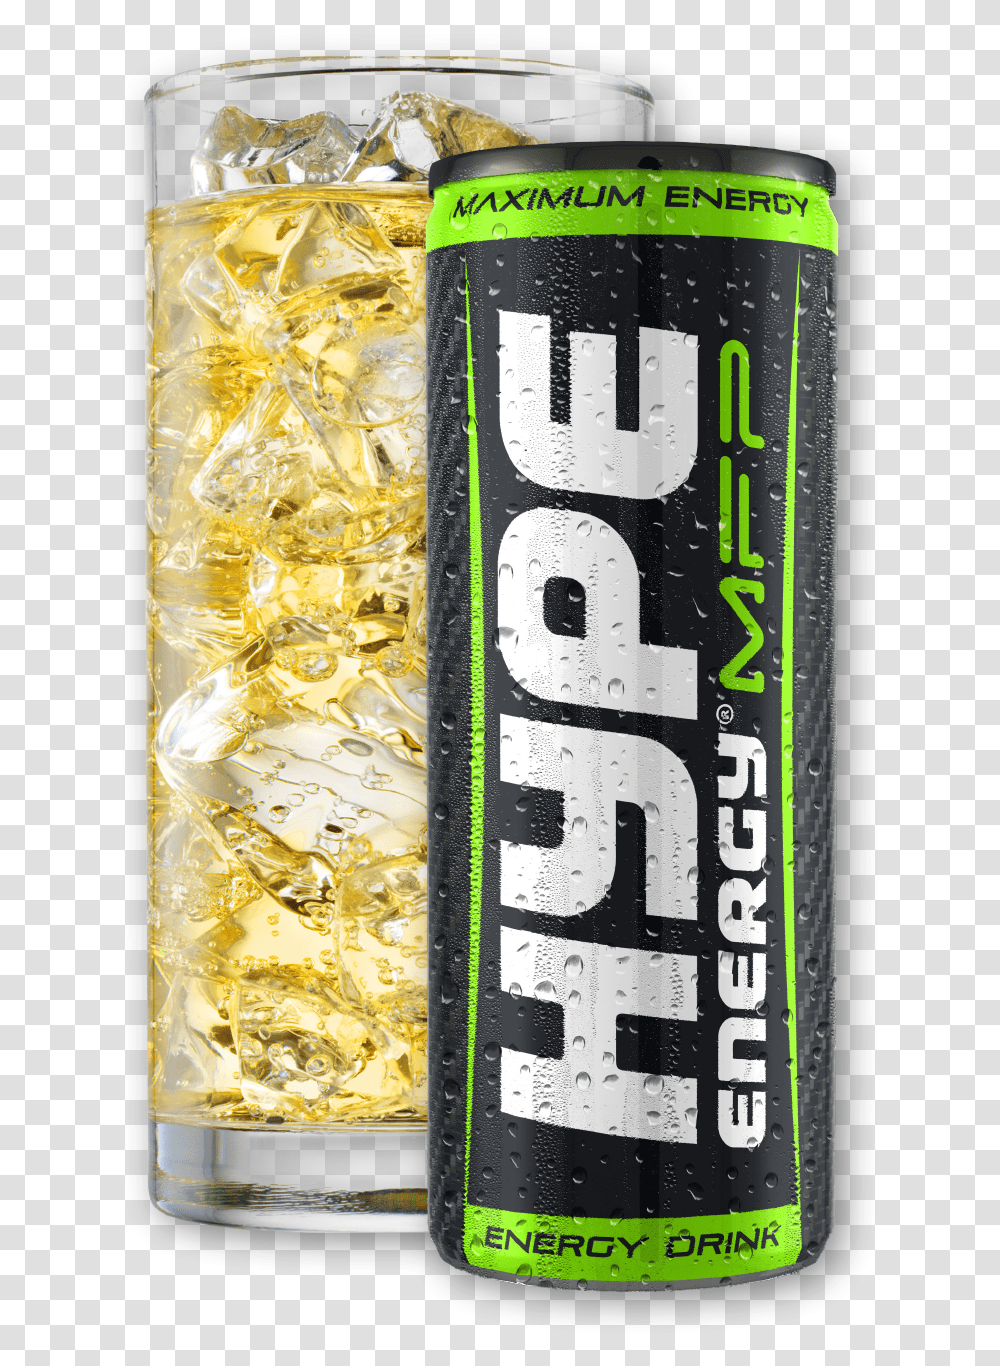 Can Glass Mfp Hype Energy Drink, Bottle, Aluminium, Beer, Alcohol Transparent Png